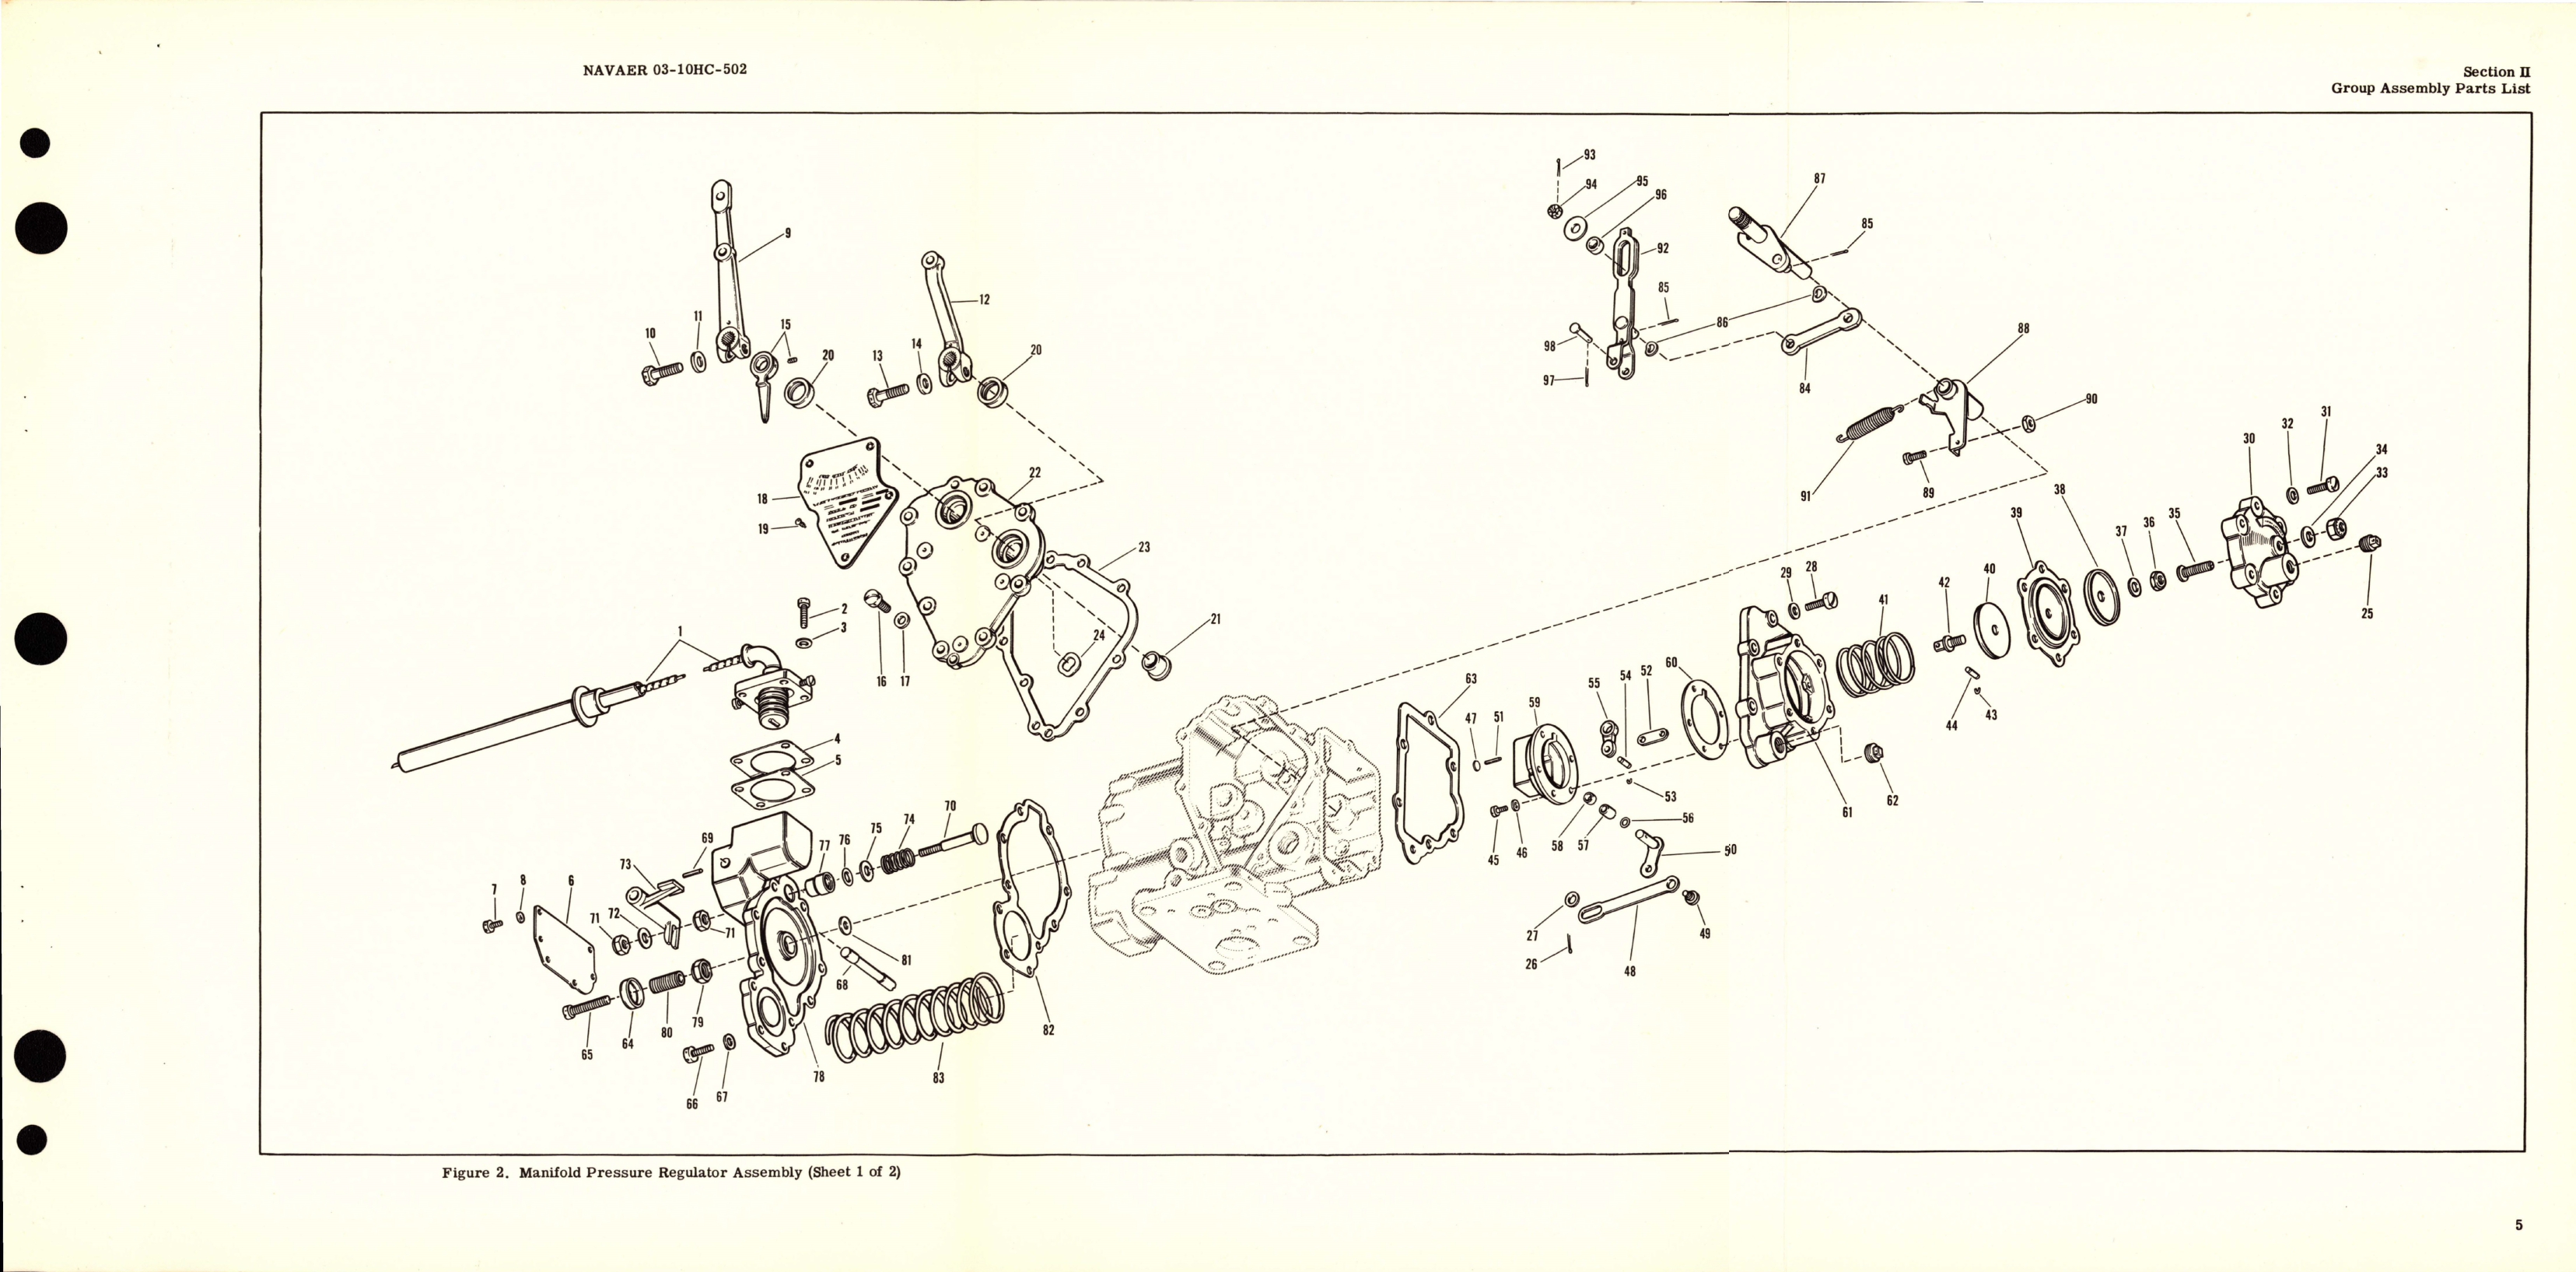 Sample page 7 from AirCorps Library document: Illustrated Parts Breakdown for Manifold Pressure Regulator Assembly - Part 7008780